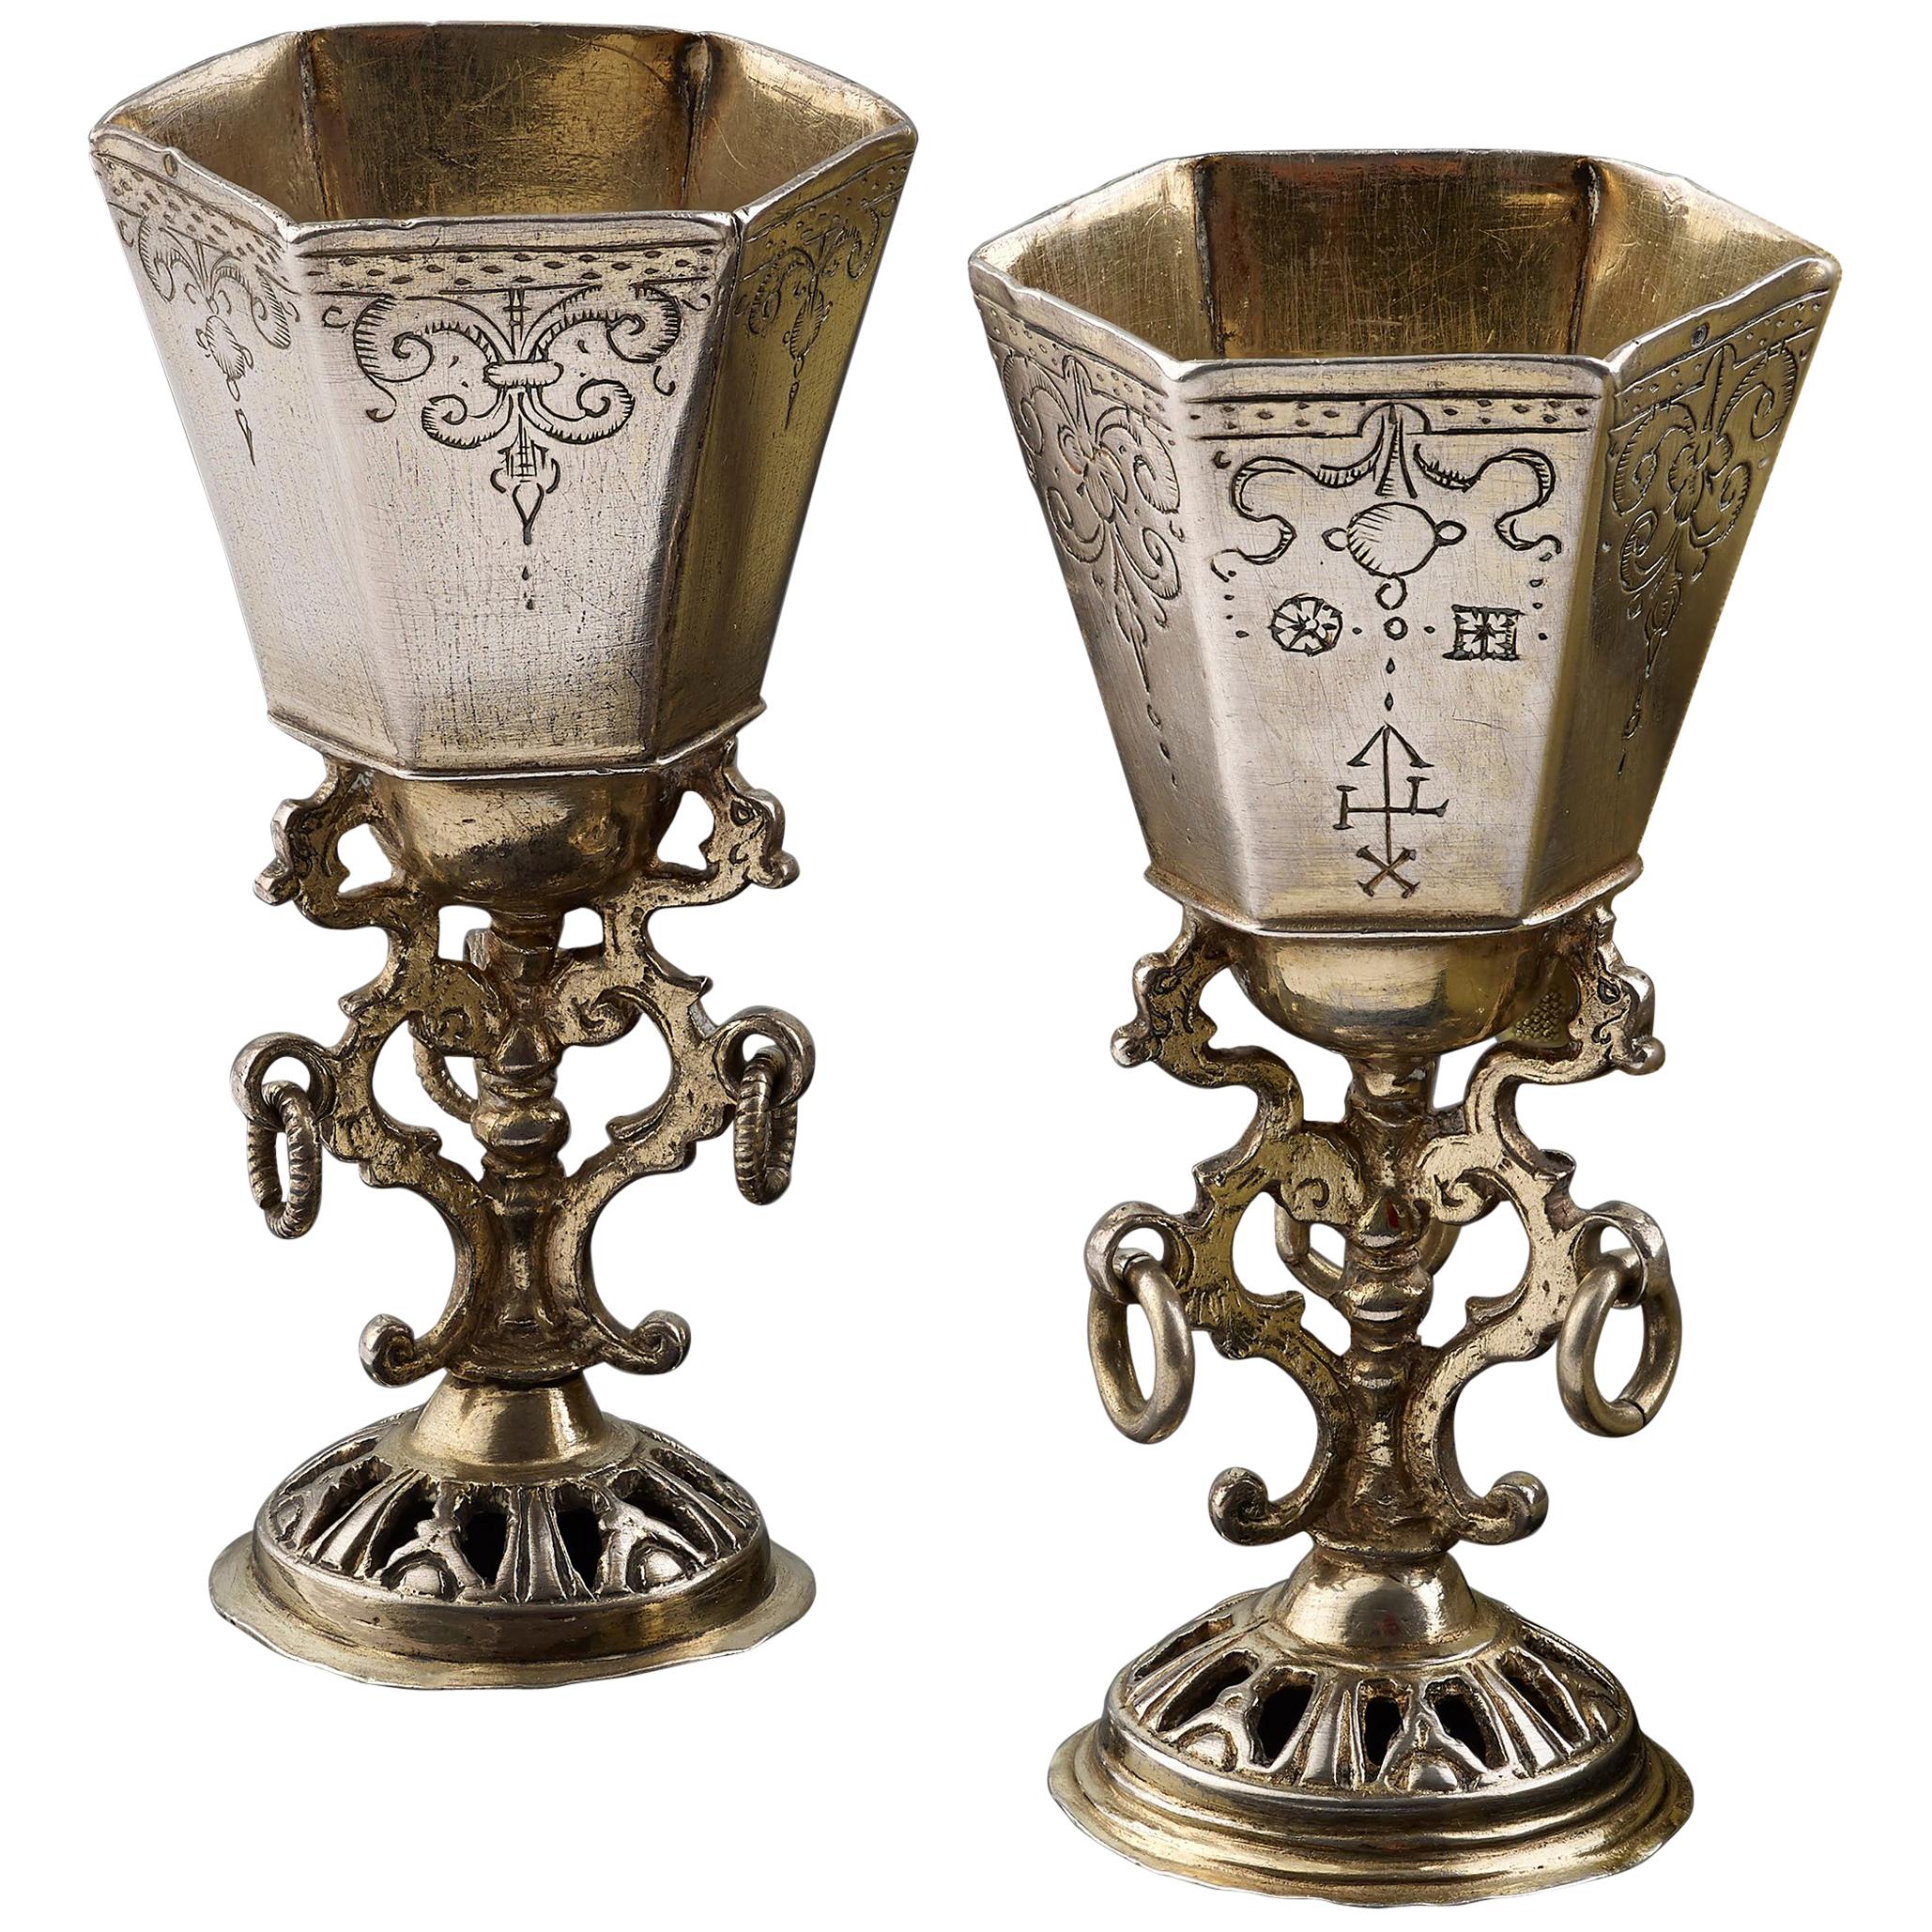 Engraved Silver and Parcel-Gilt Cups, German, circa 1630